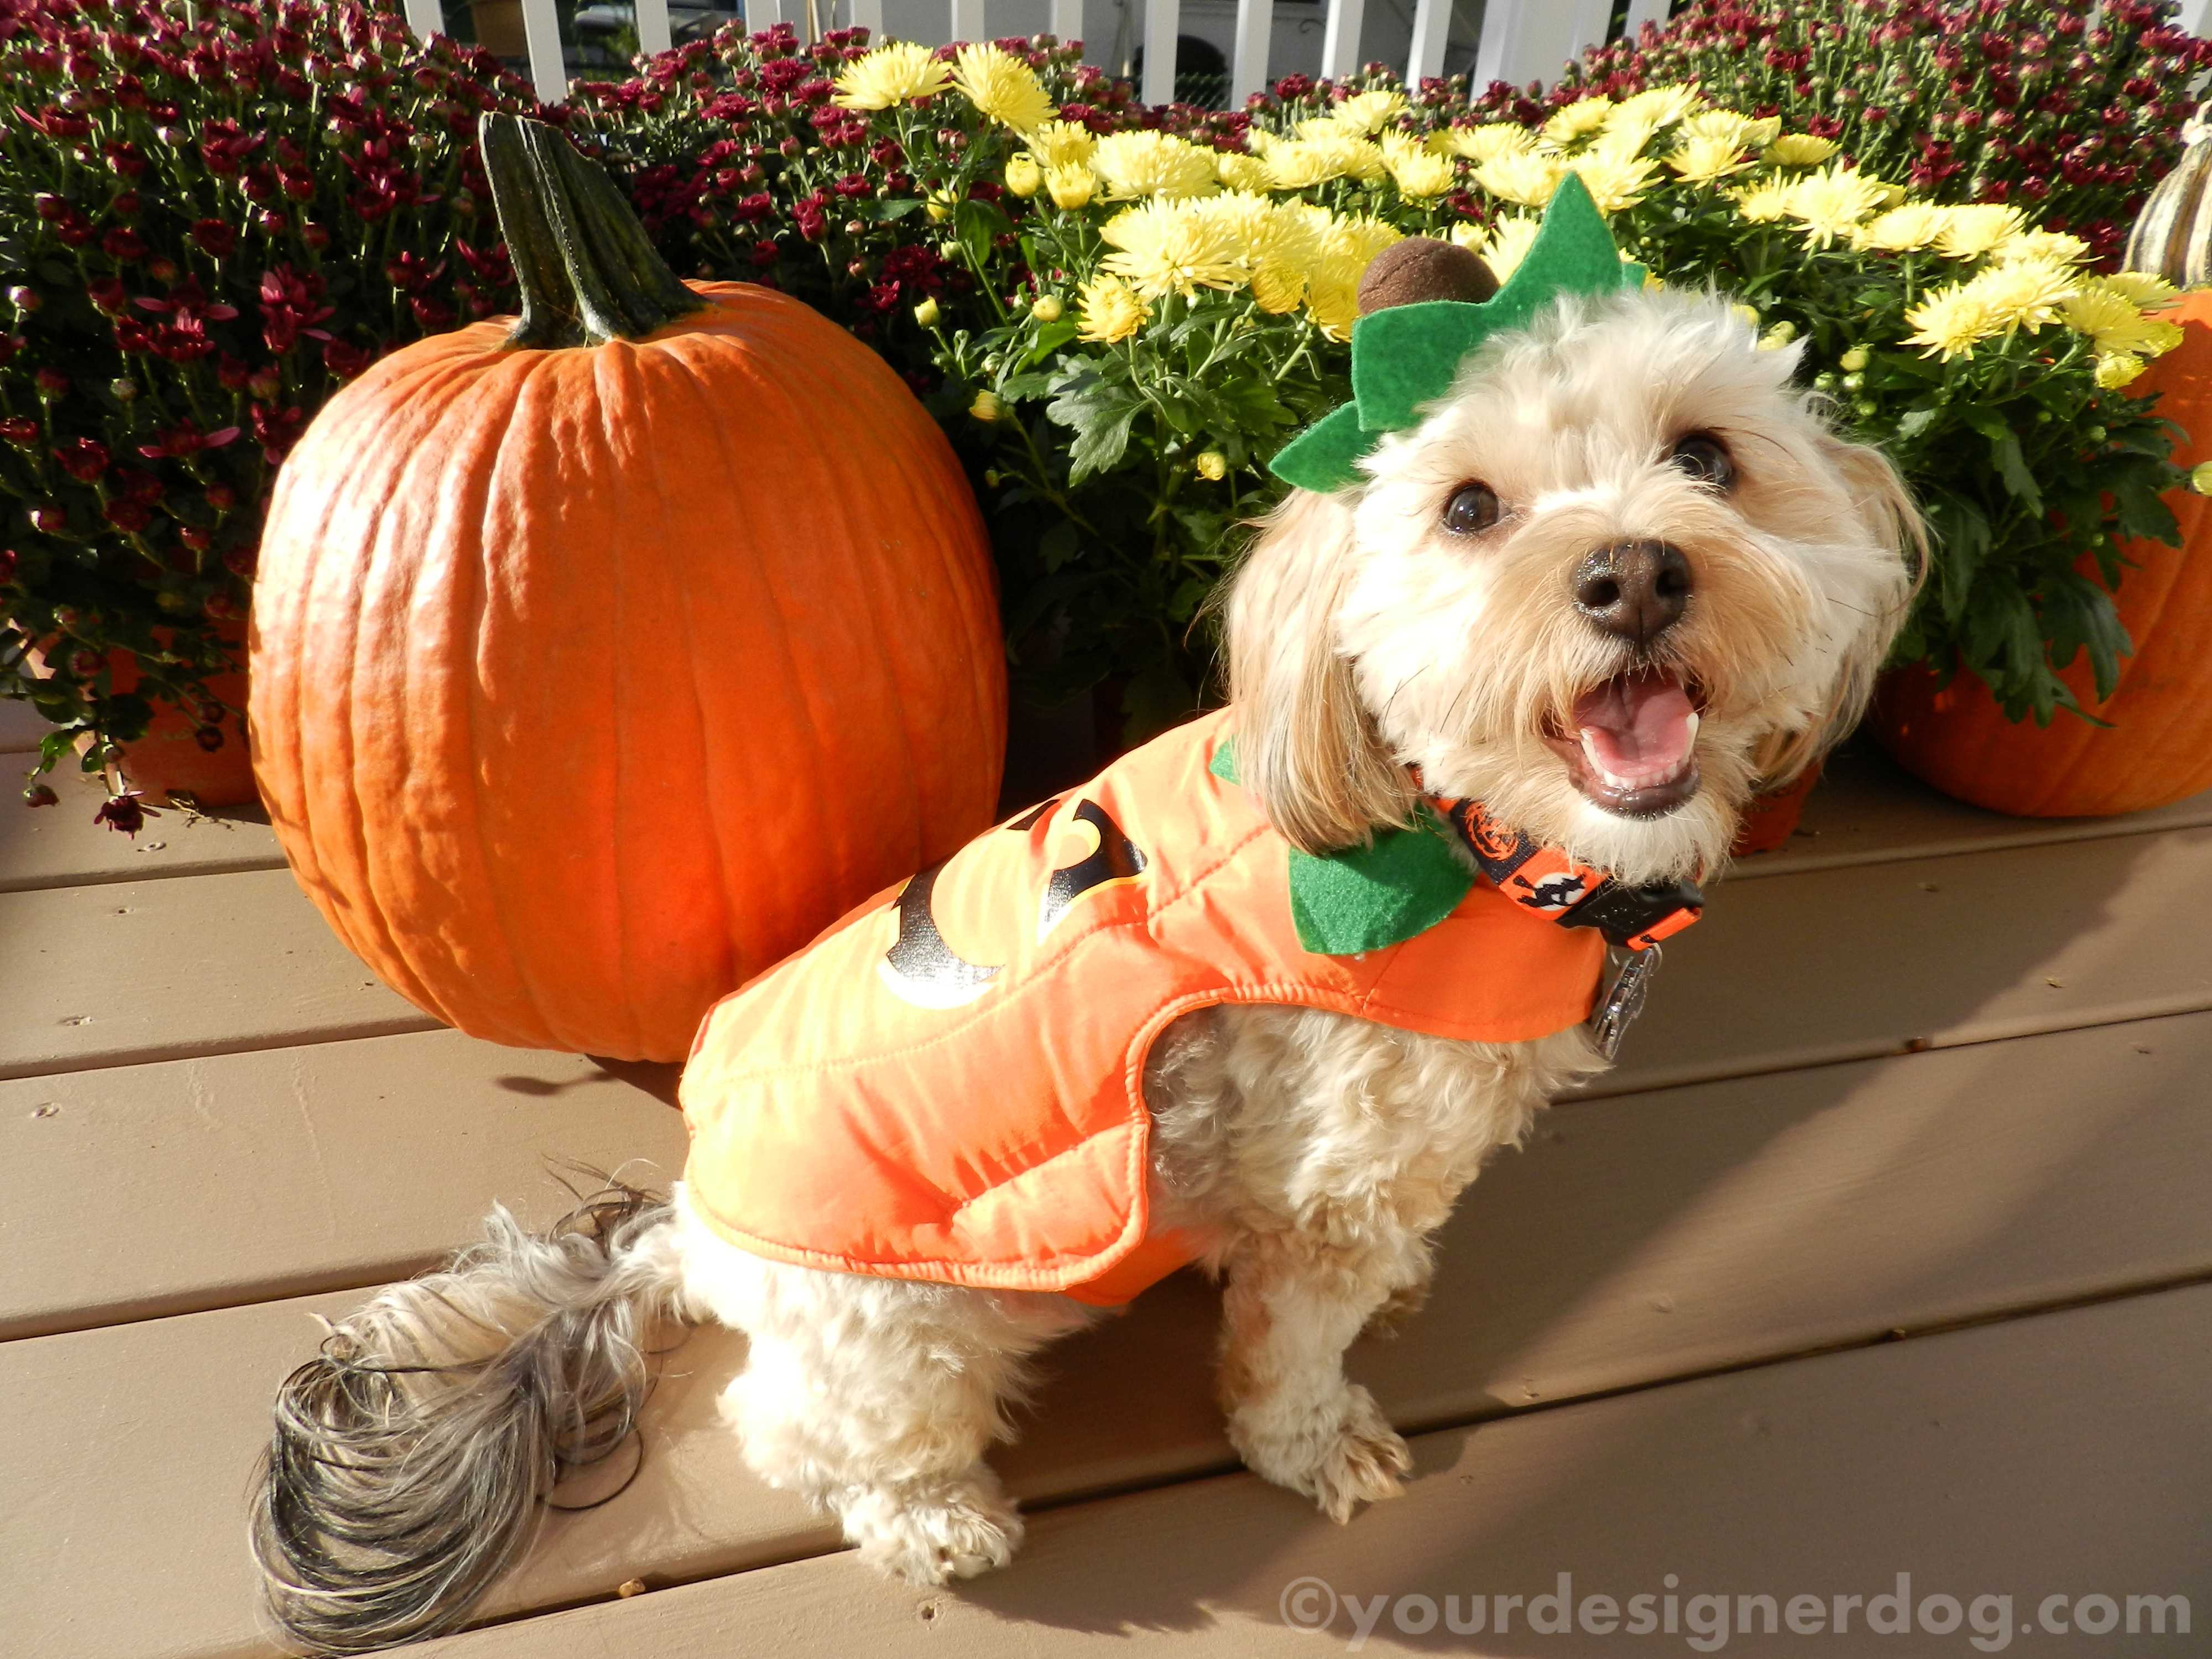 dogs, designer dogs, yorkipoo, yorkie poo, pumpkins, fall, halloween, mums, dogs with flowers, dogs smiling, tongue out